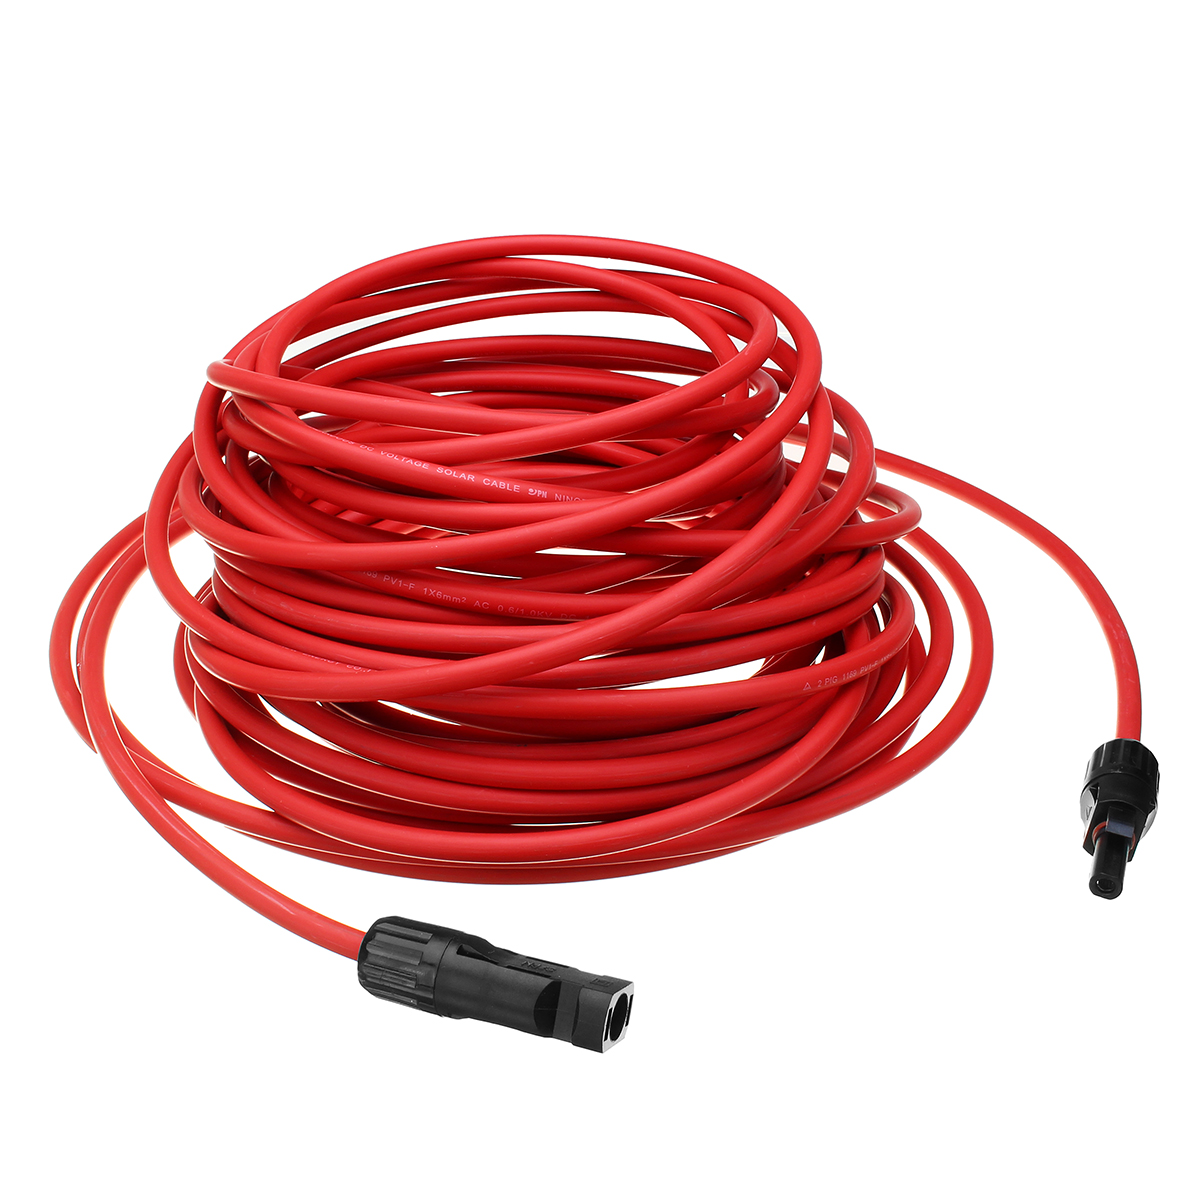 10-AWG-10-Meter-Solar-Panel-Extension-Cable-Wire-BlackRed-with-MC4-Connectors-1338696-3